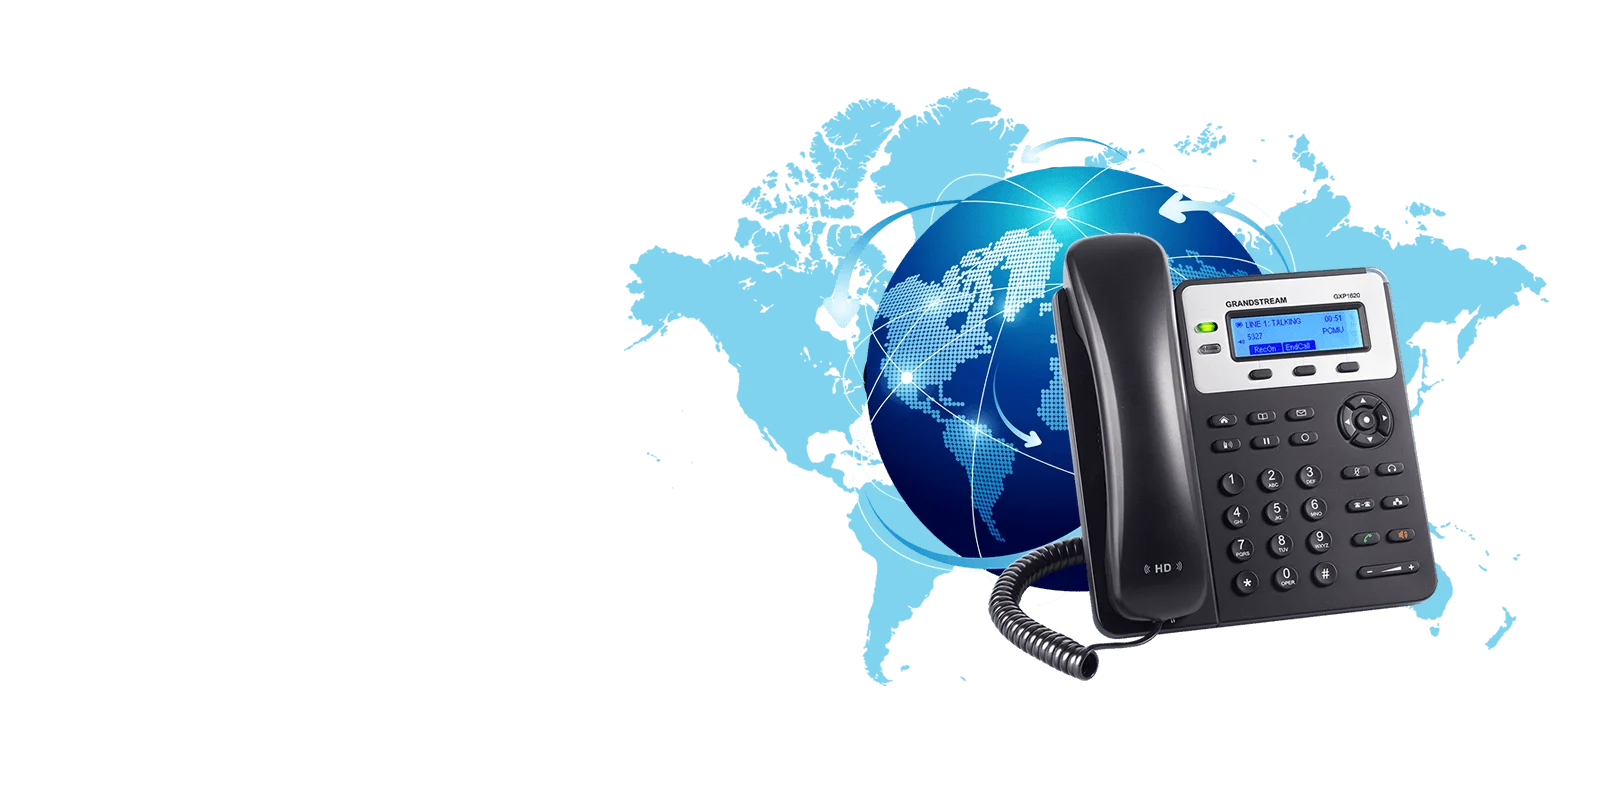 Global3voip